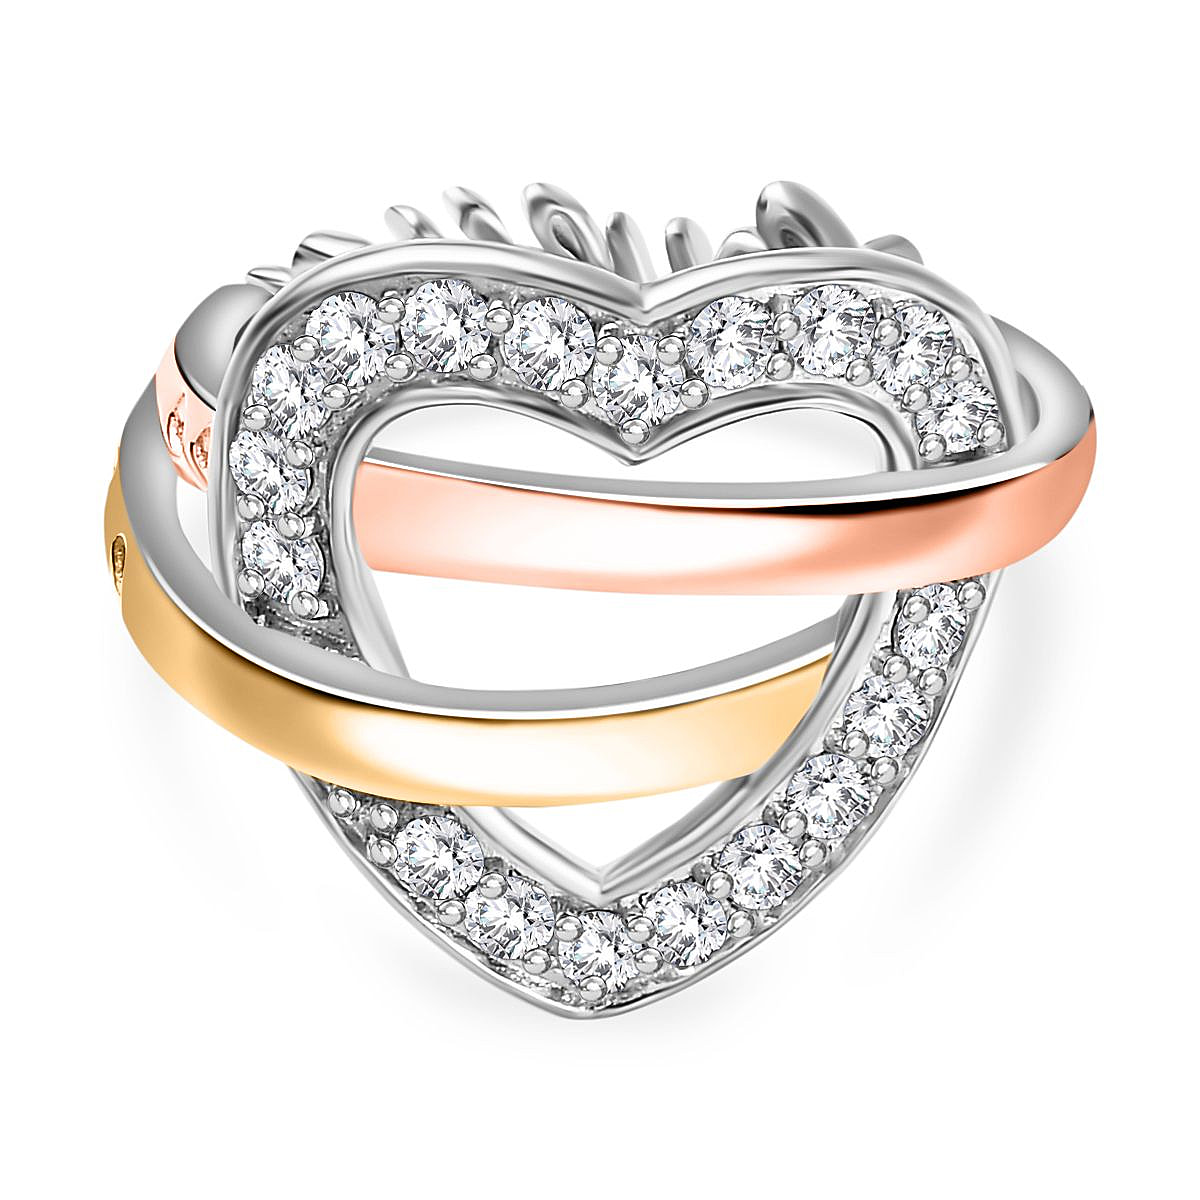 GP Amore Collection - Moissanite Heart Ring in Platinum, 18K YG & RG Vermeil Plated Sterling Silver, Silver Wt. 5.50 Gms